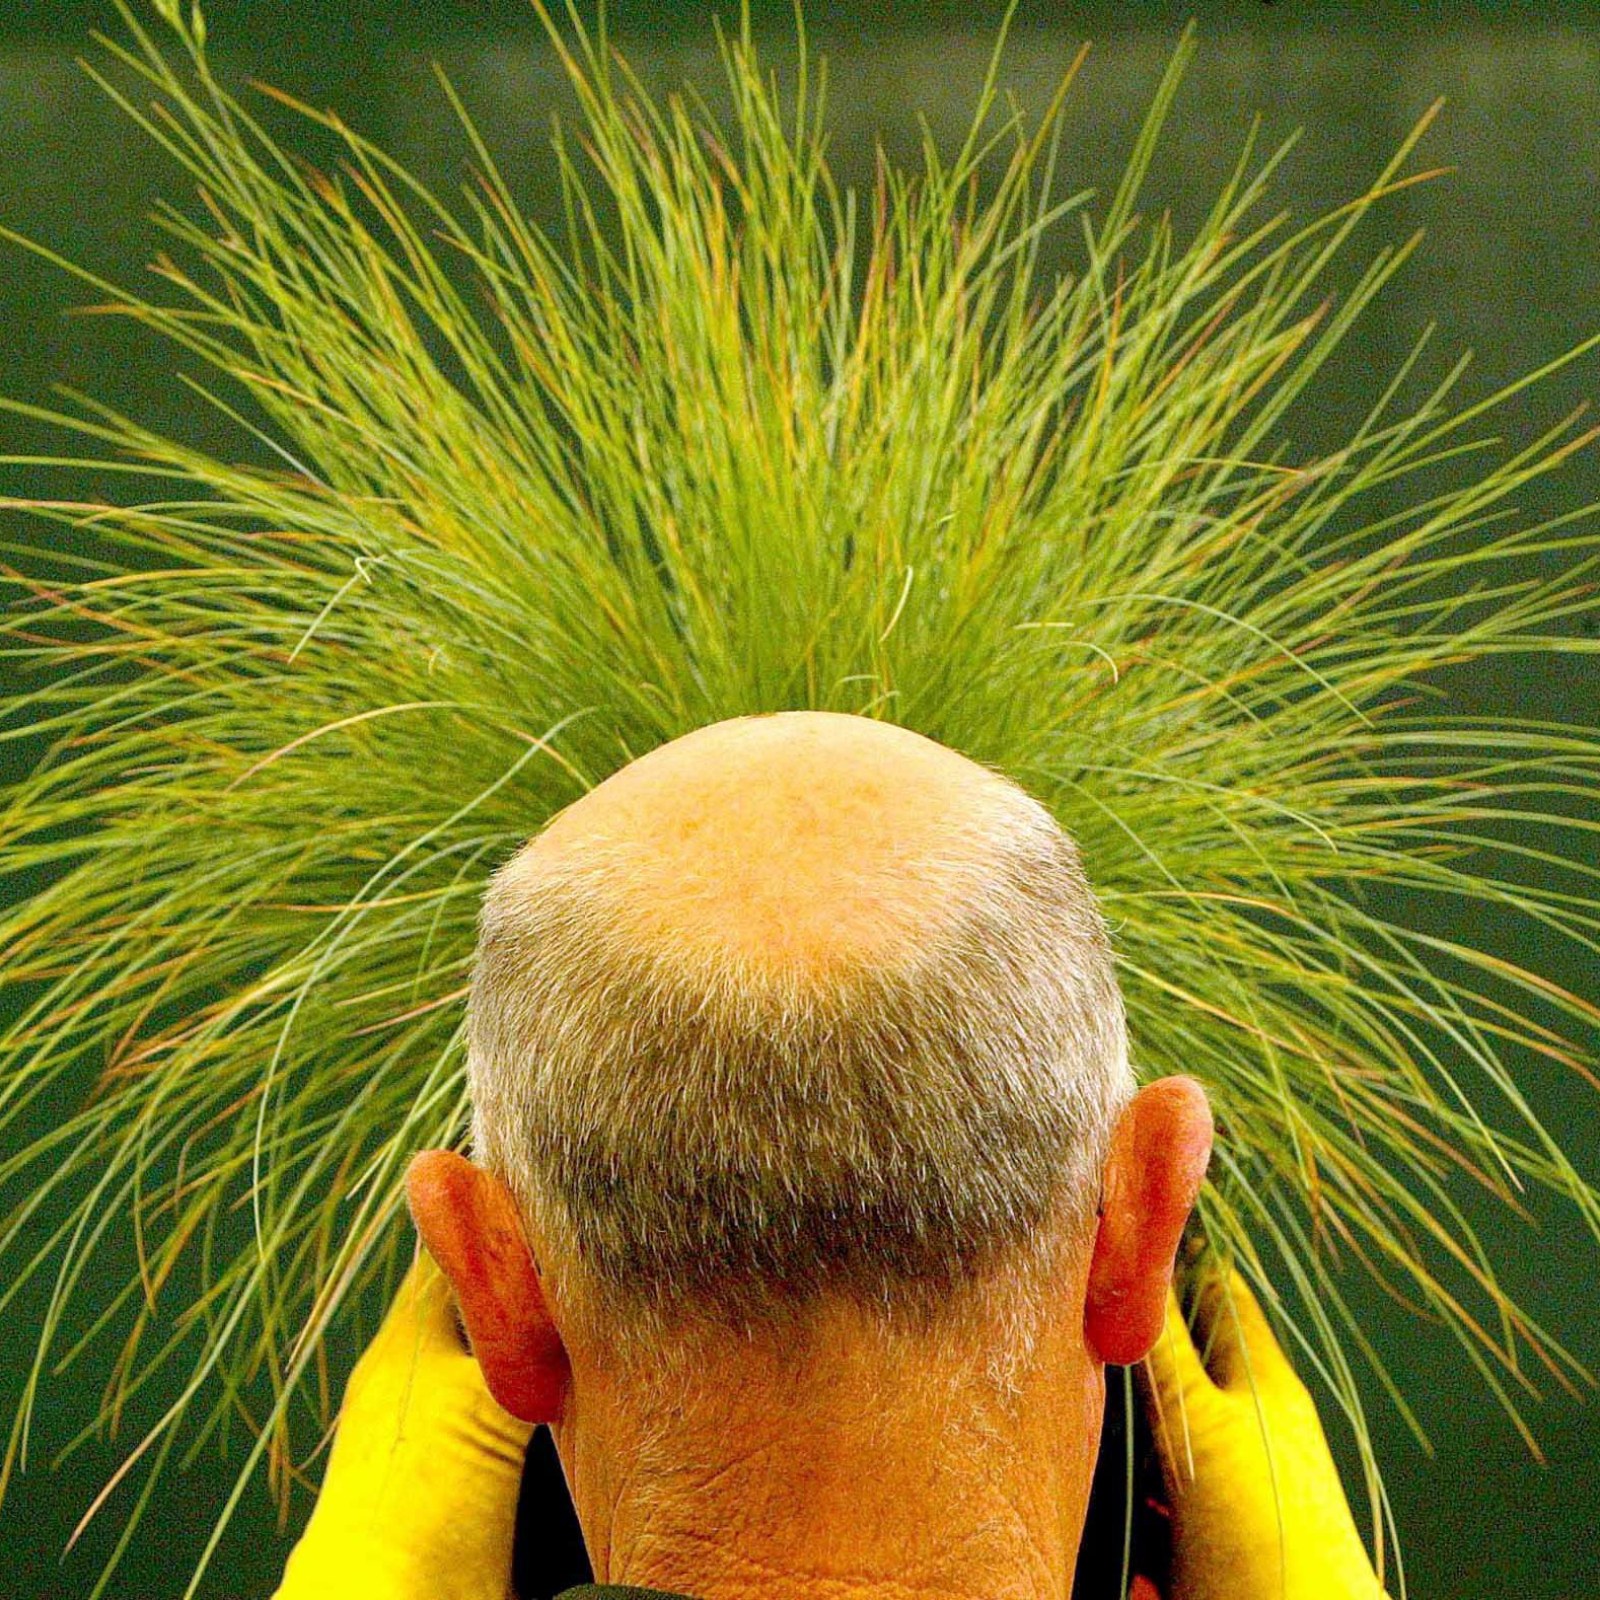 New Cure for Baldness Could Be Found in Existing Drug, Scientists Say